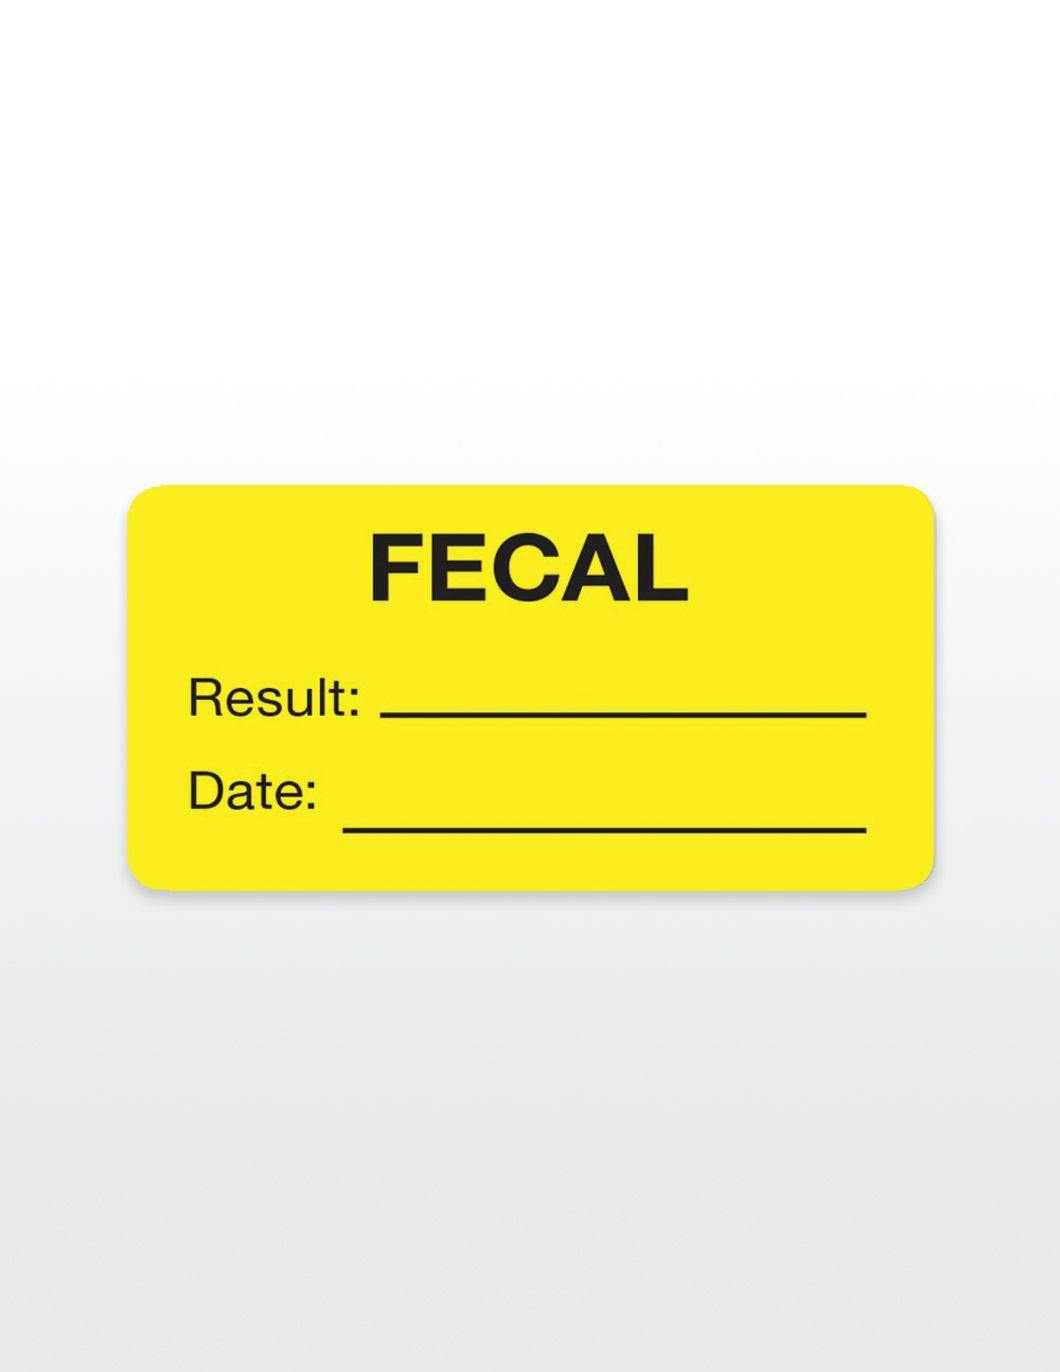 fecal-medical-record-stickers